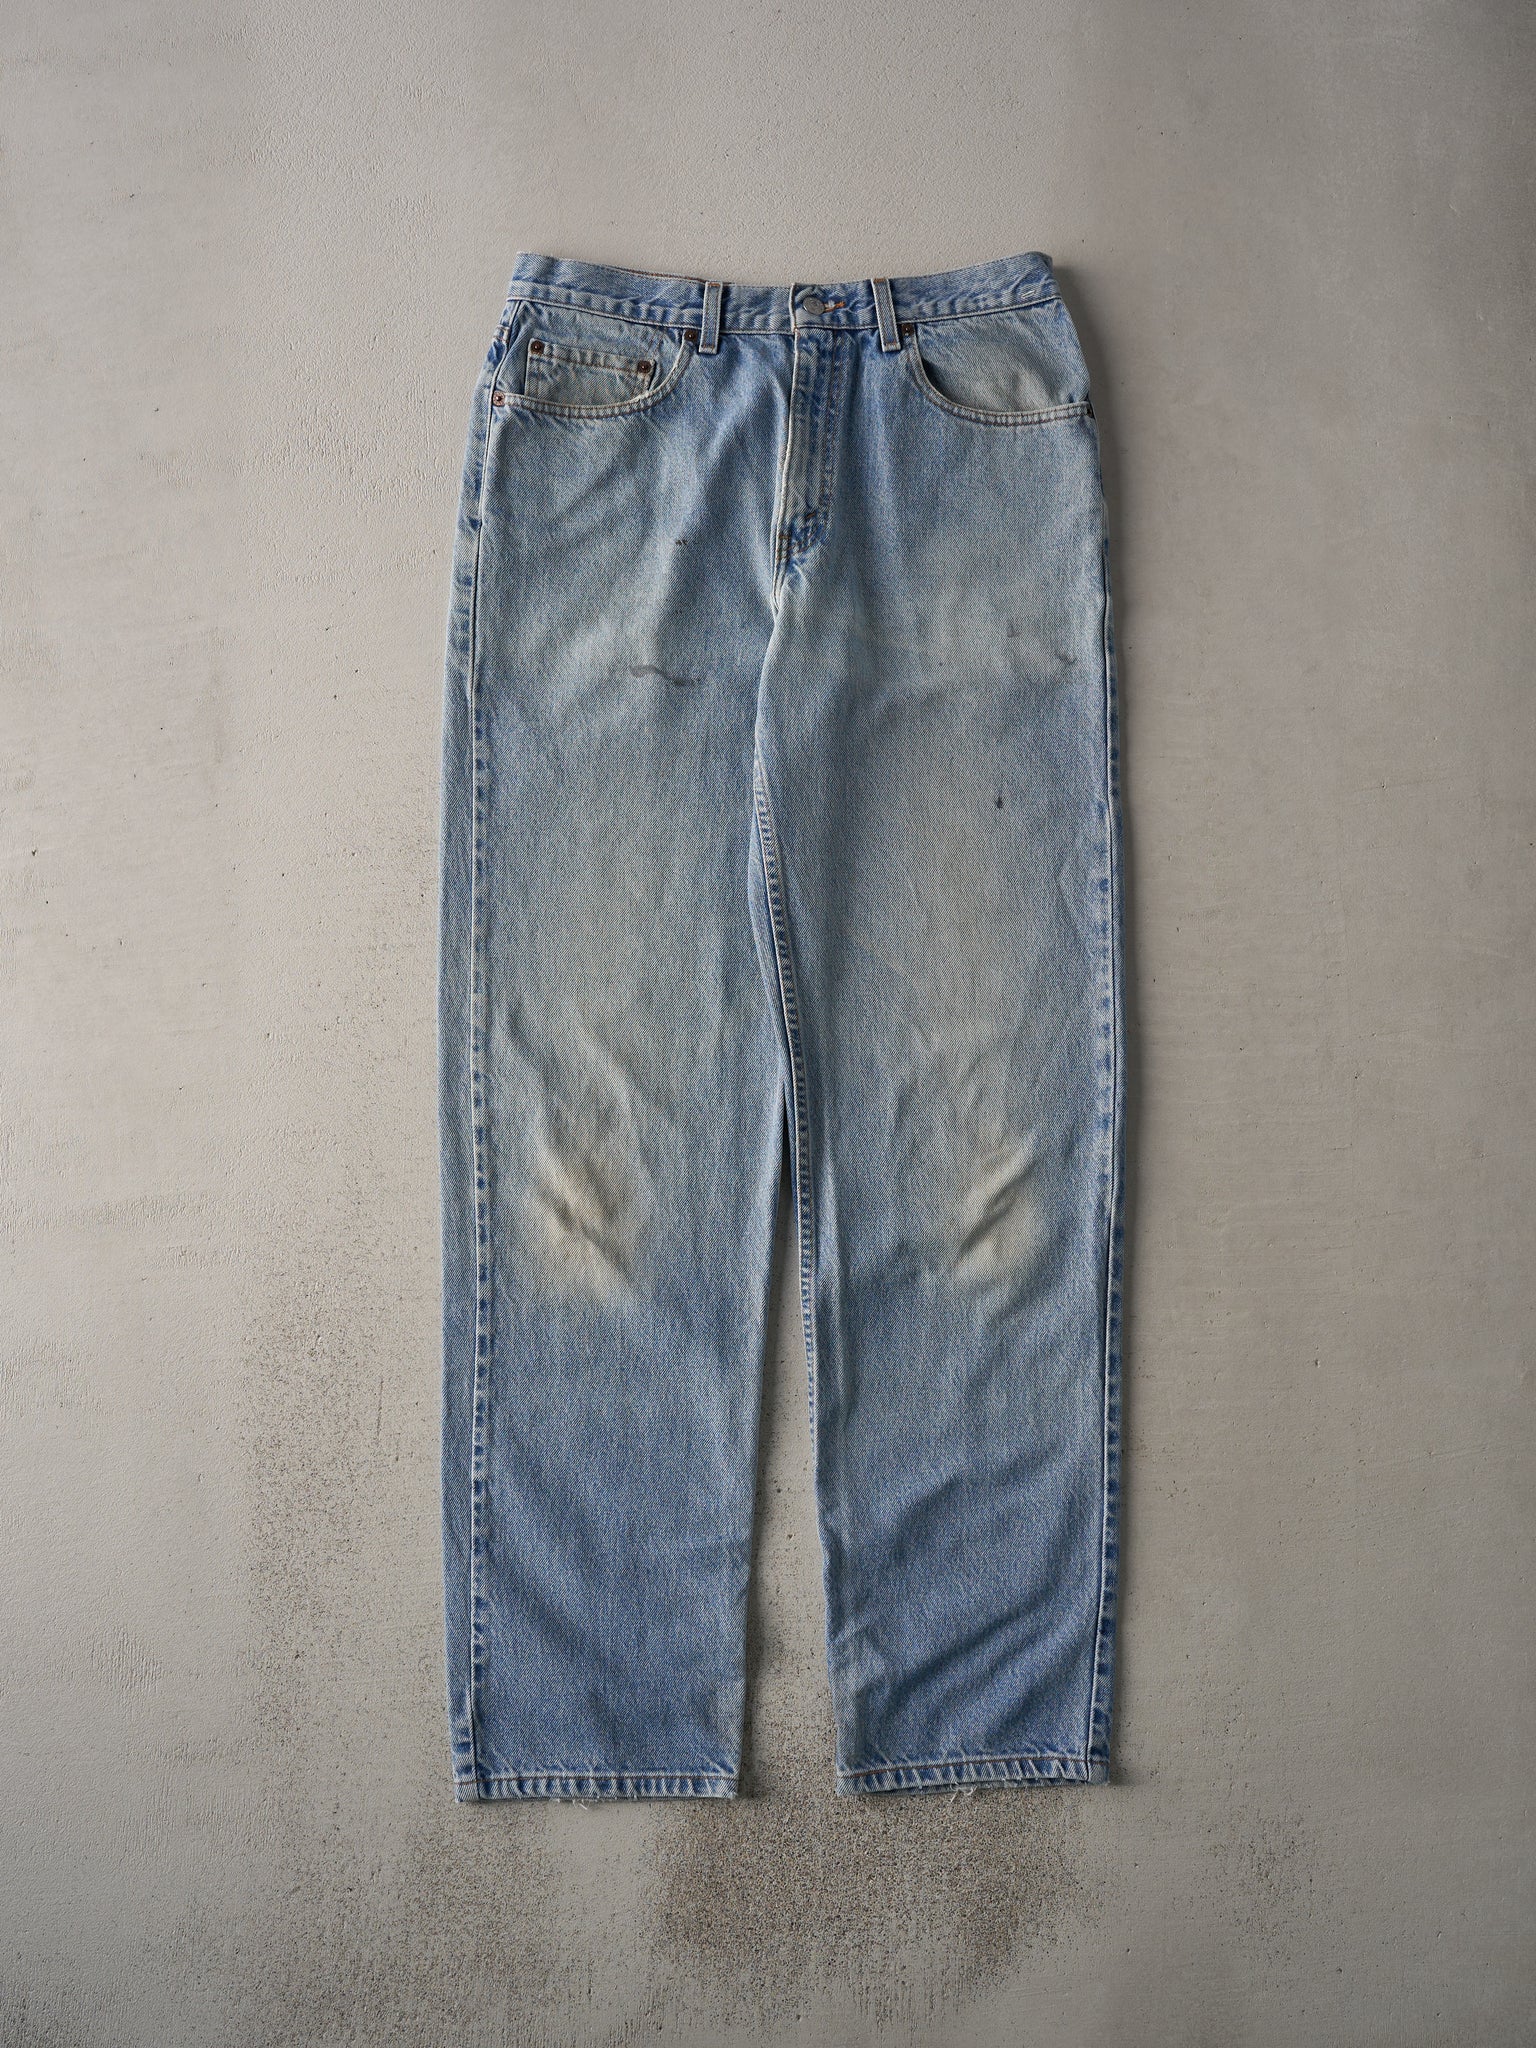 Vintage 90s Light Wash Levi's Relaxed Straight Leg Jeans (33x33)